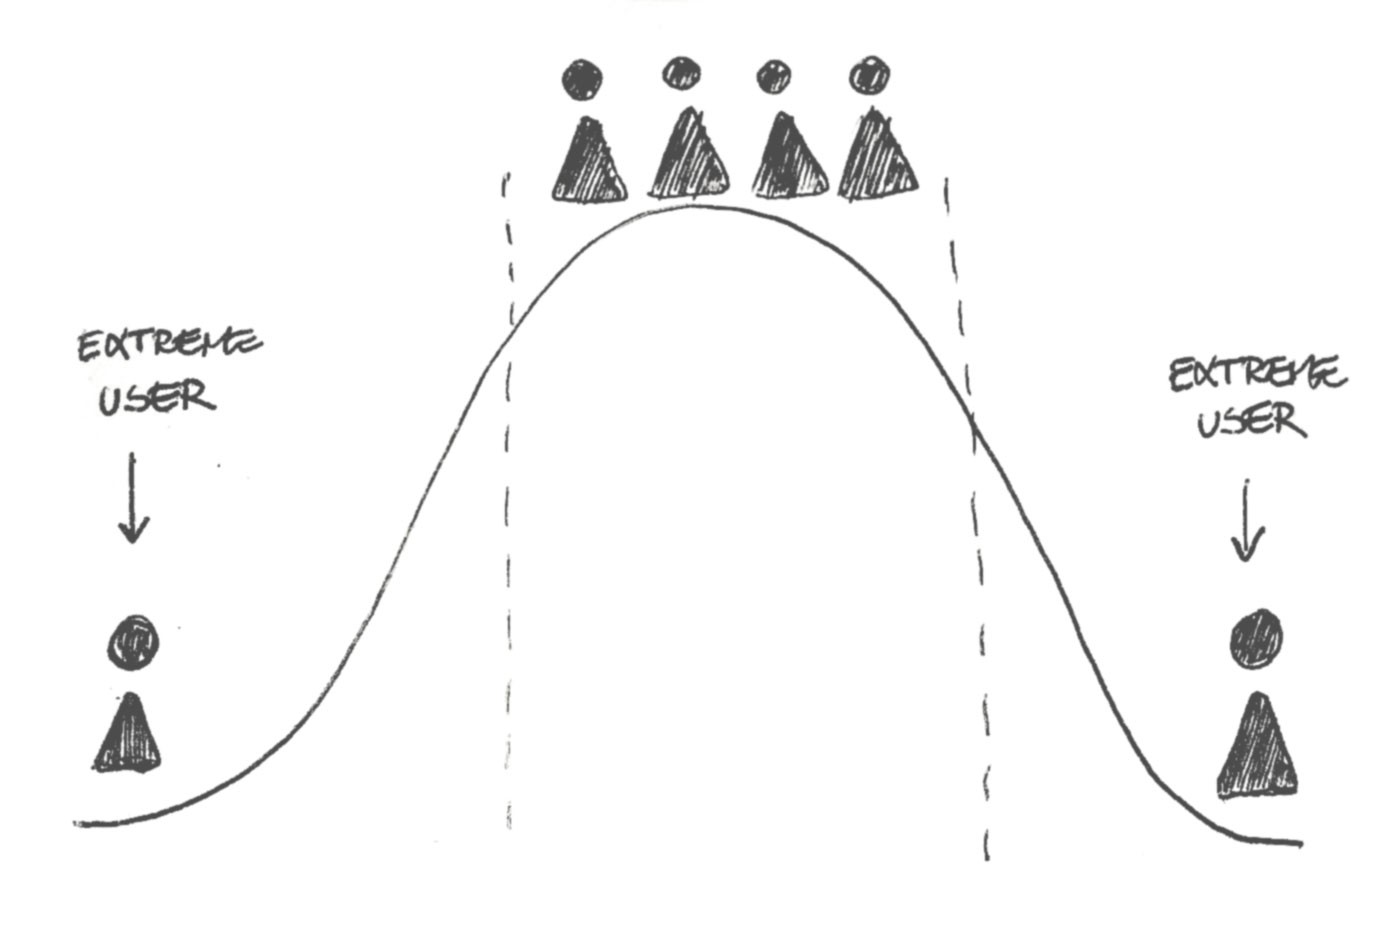 An image depicting extreme users existance using a normal graph.